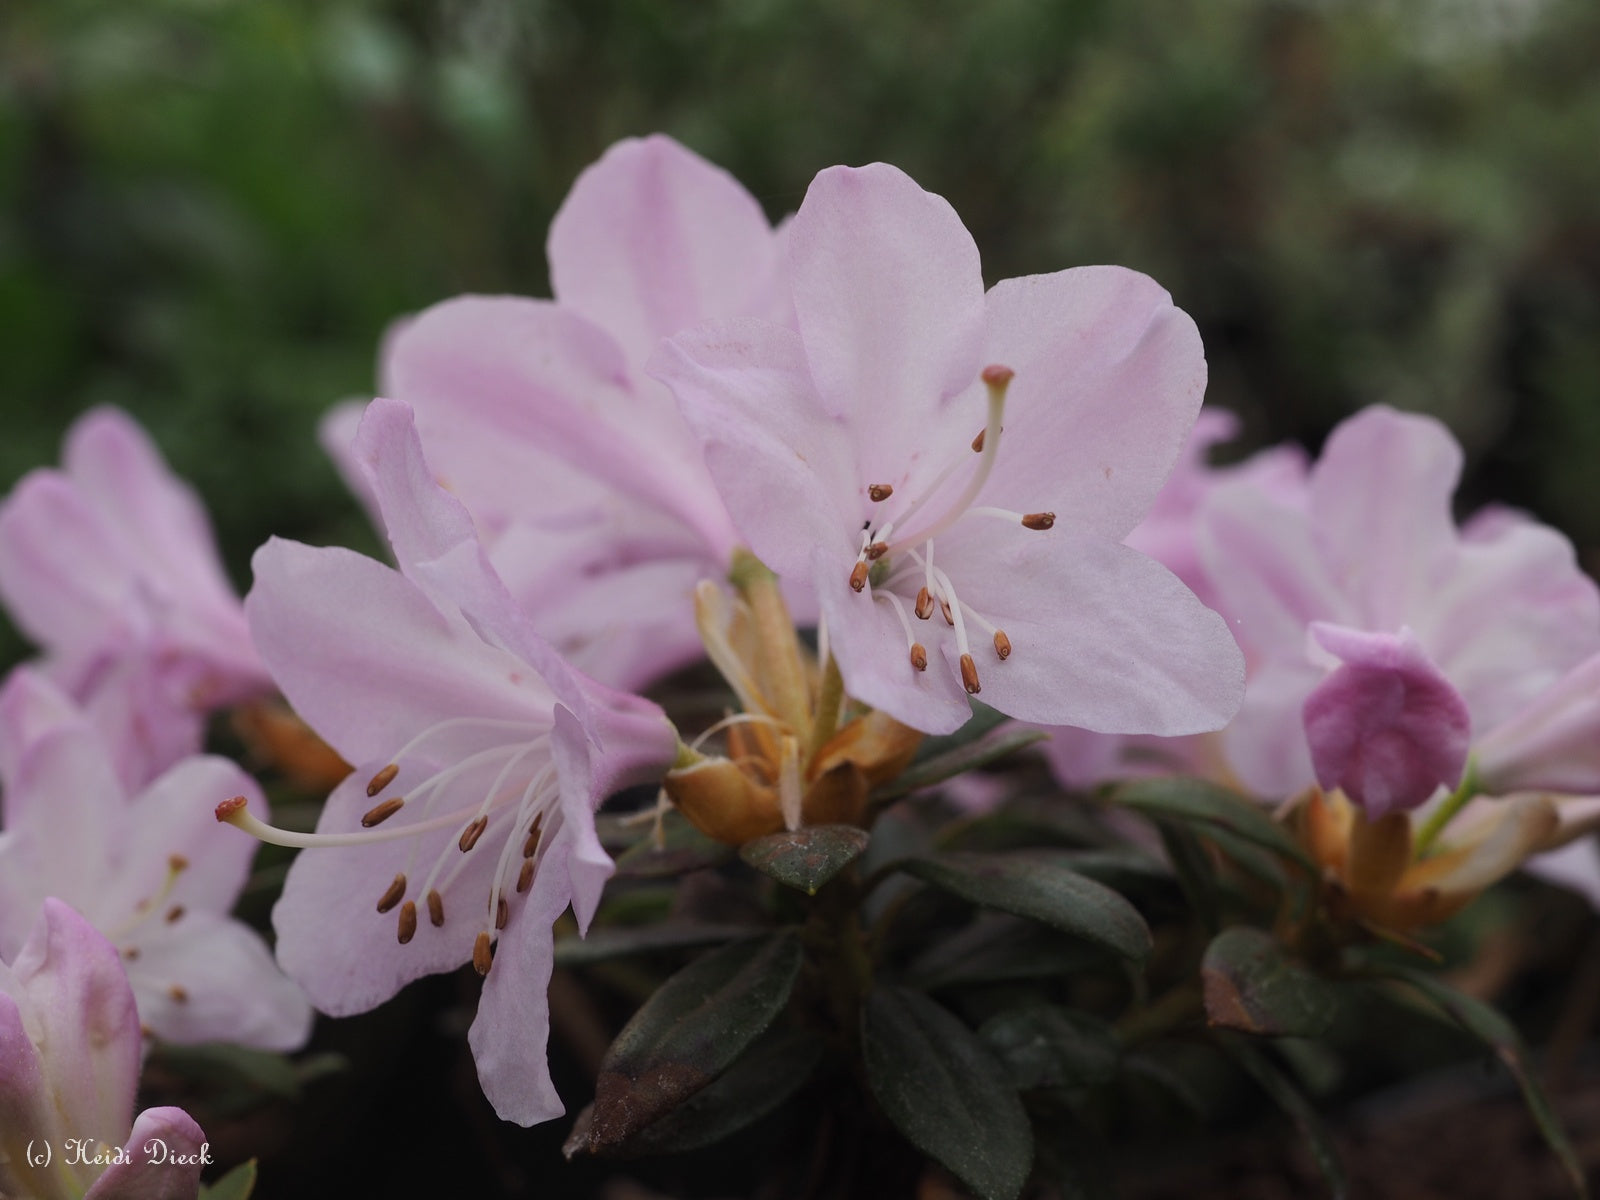 Rhododendron-Pharalope5a2eb3d0a6667